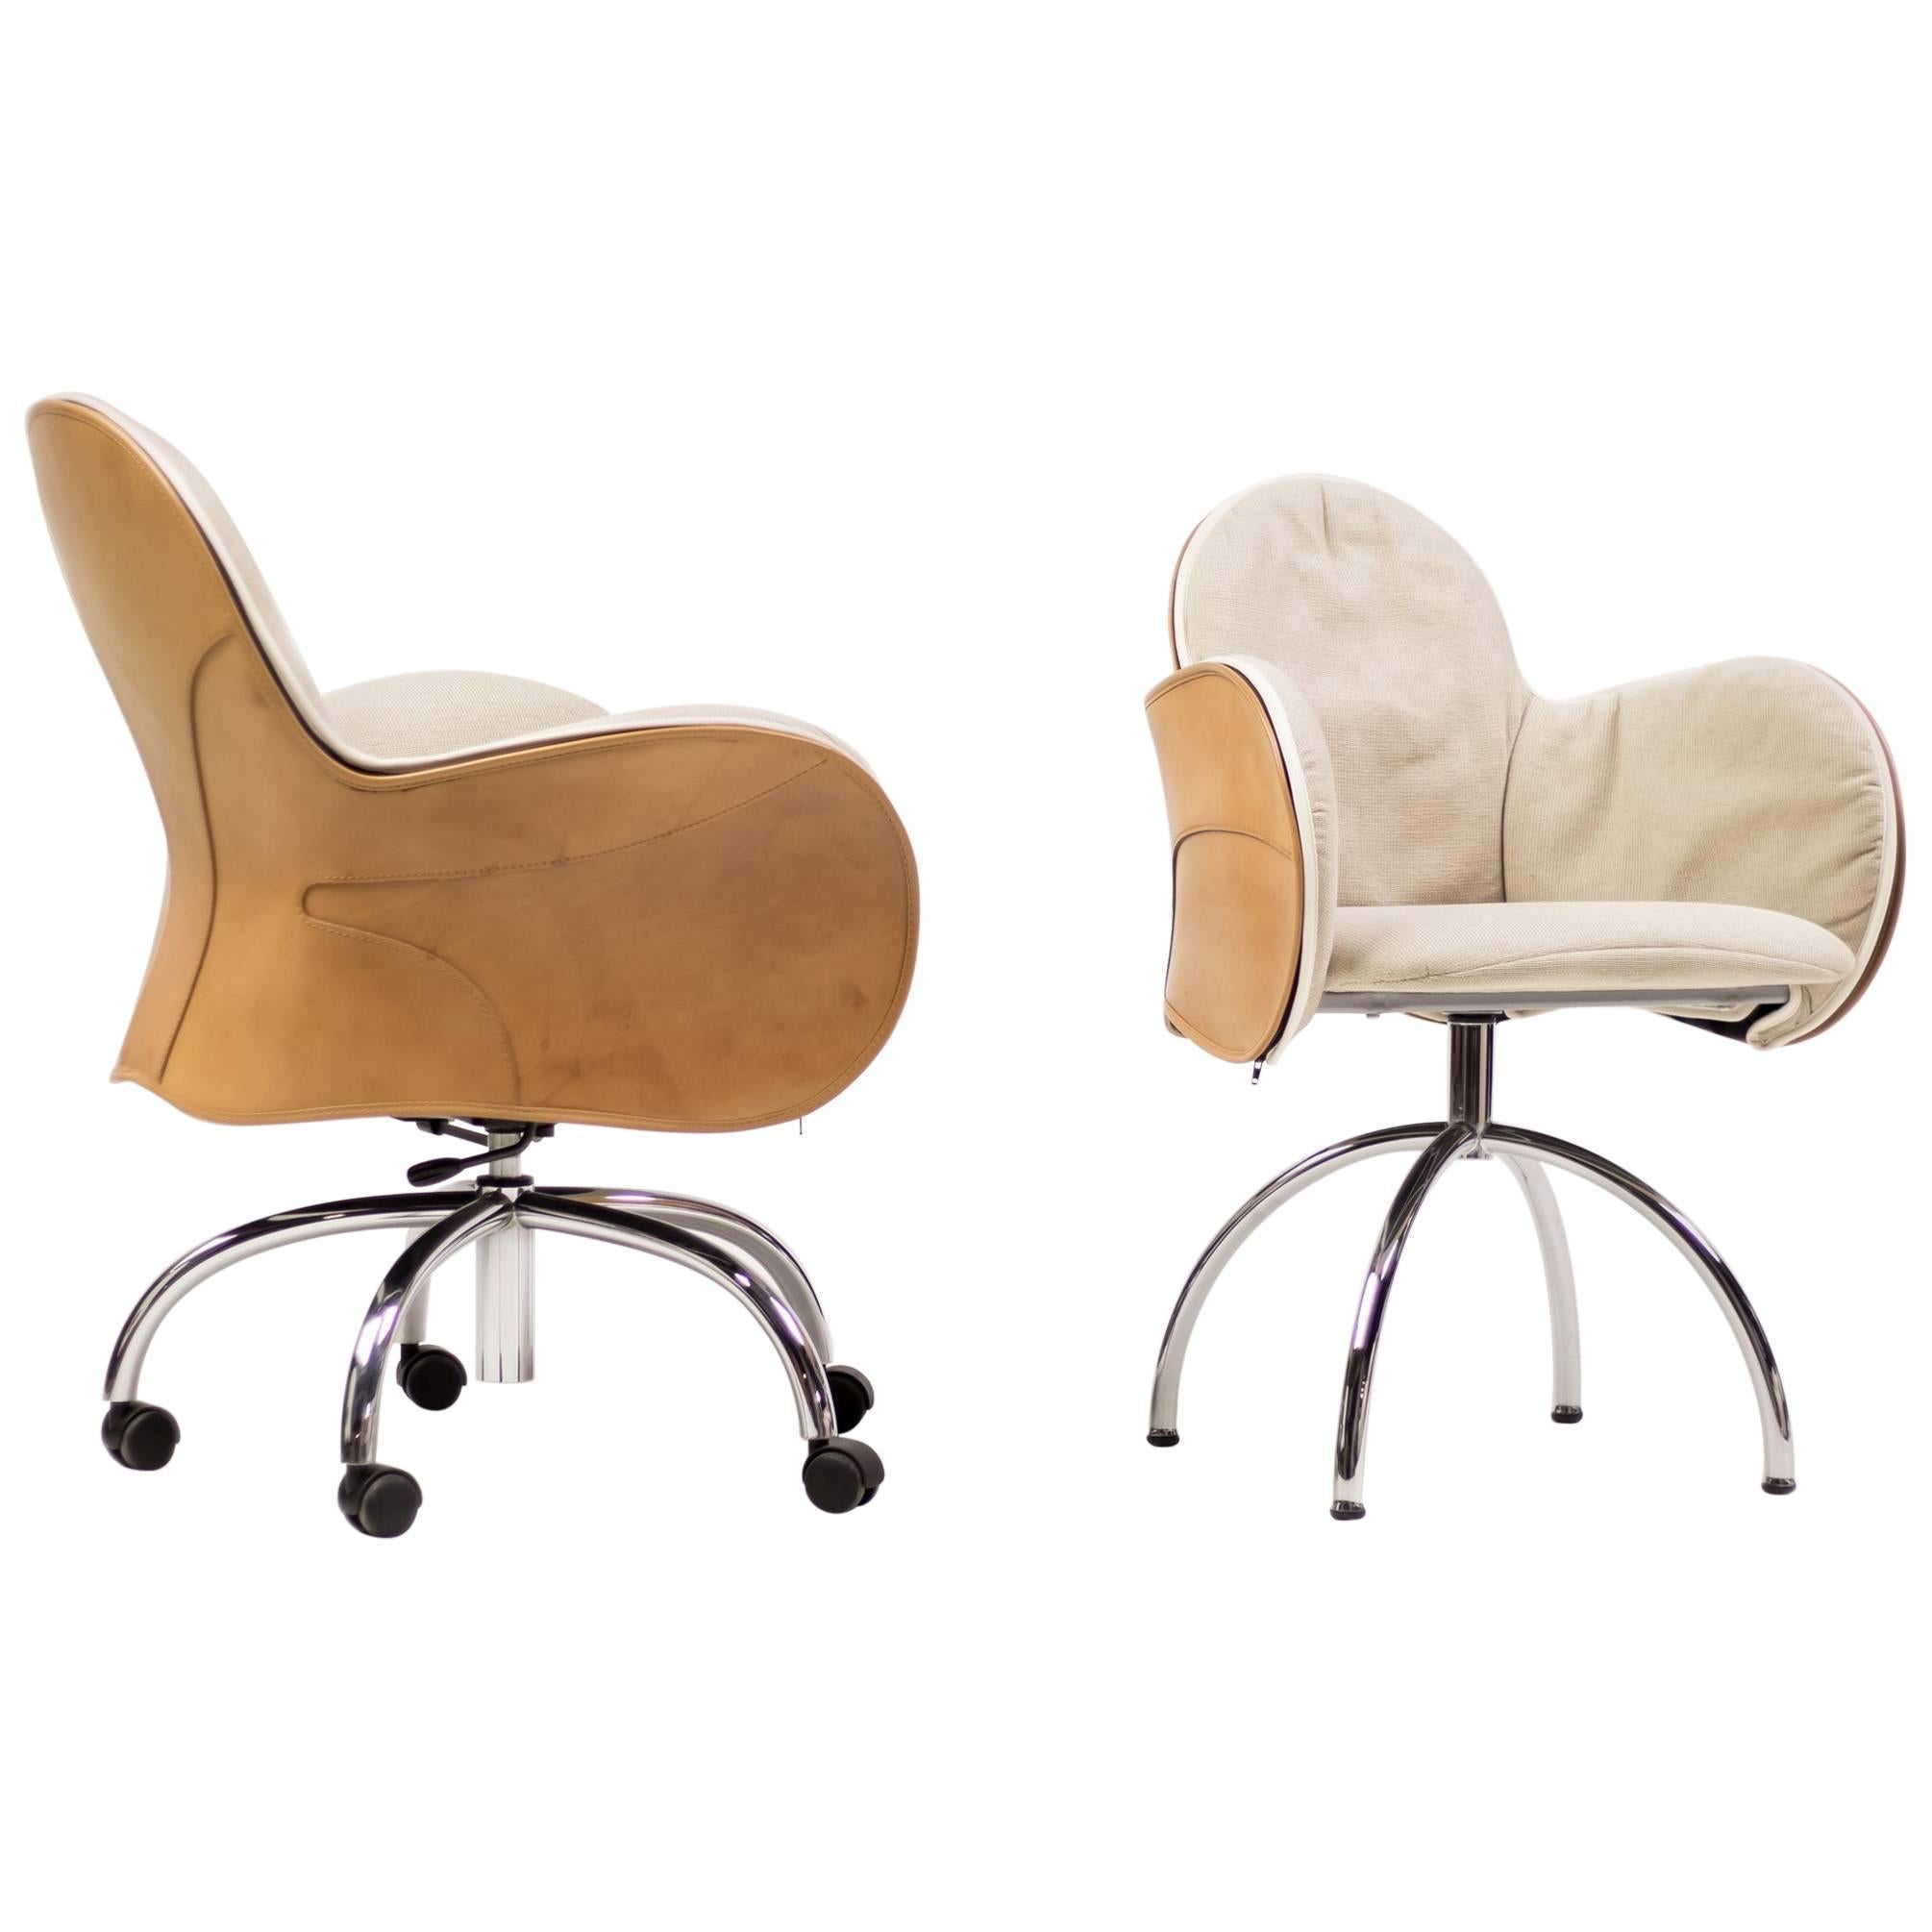 De Padova Incisa Chair and Serbelloni Desk Chair in Saddle Leather